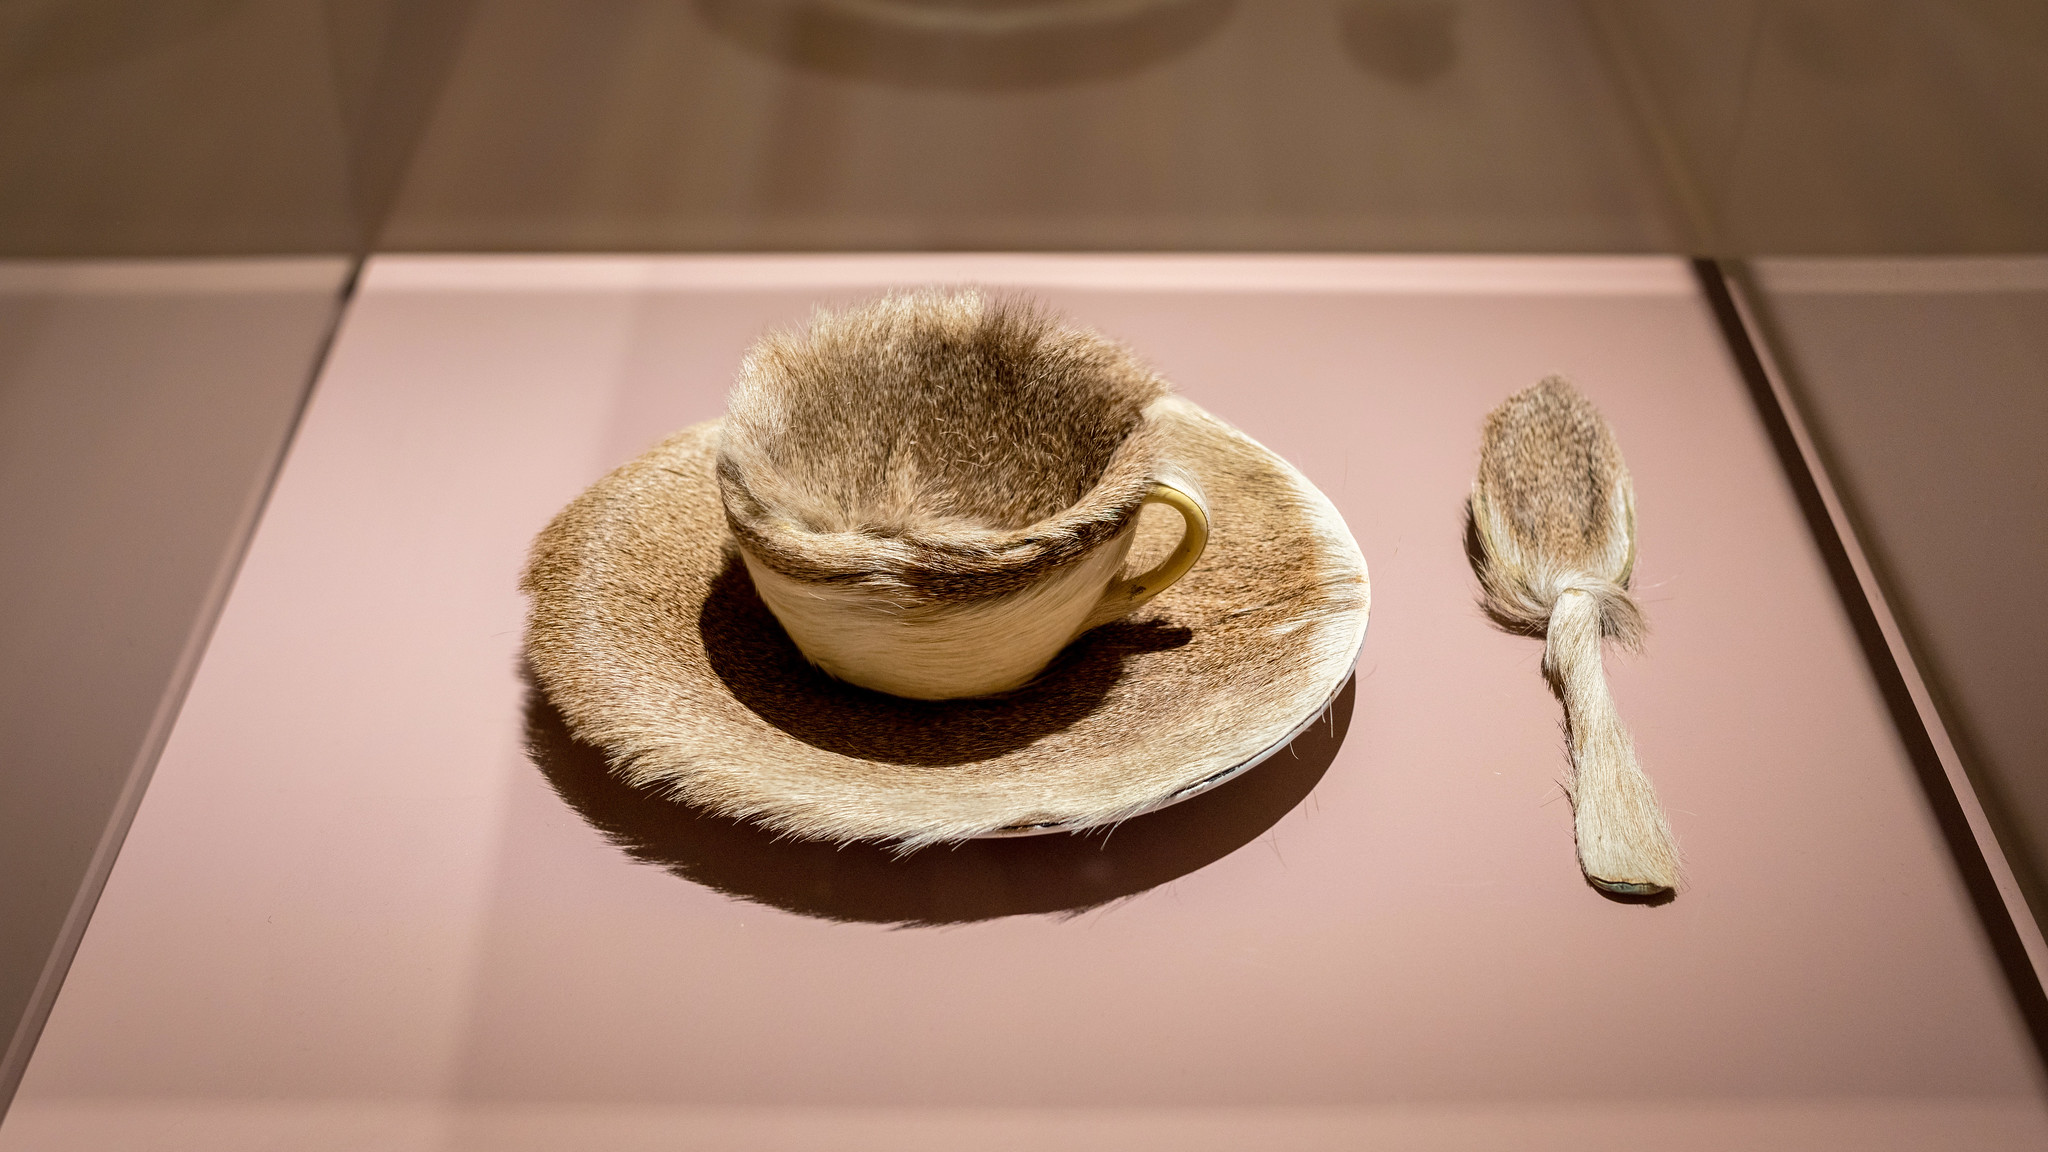 Meret Oppenheim, Object (Fur-covered cup, saucer, and spoon) photo picture